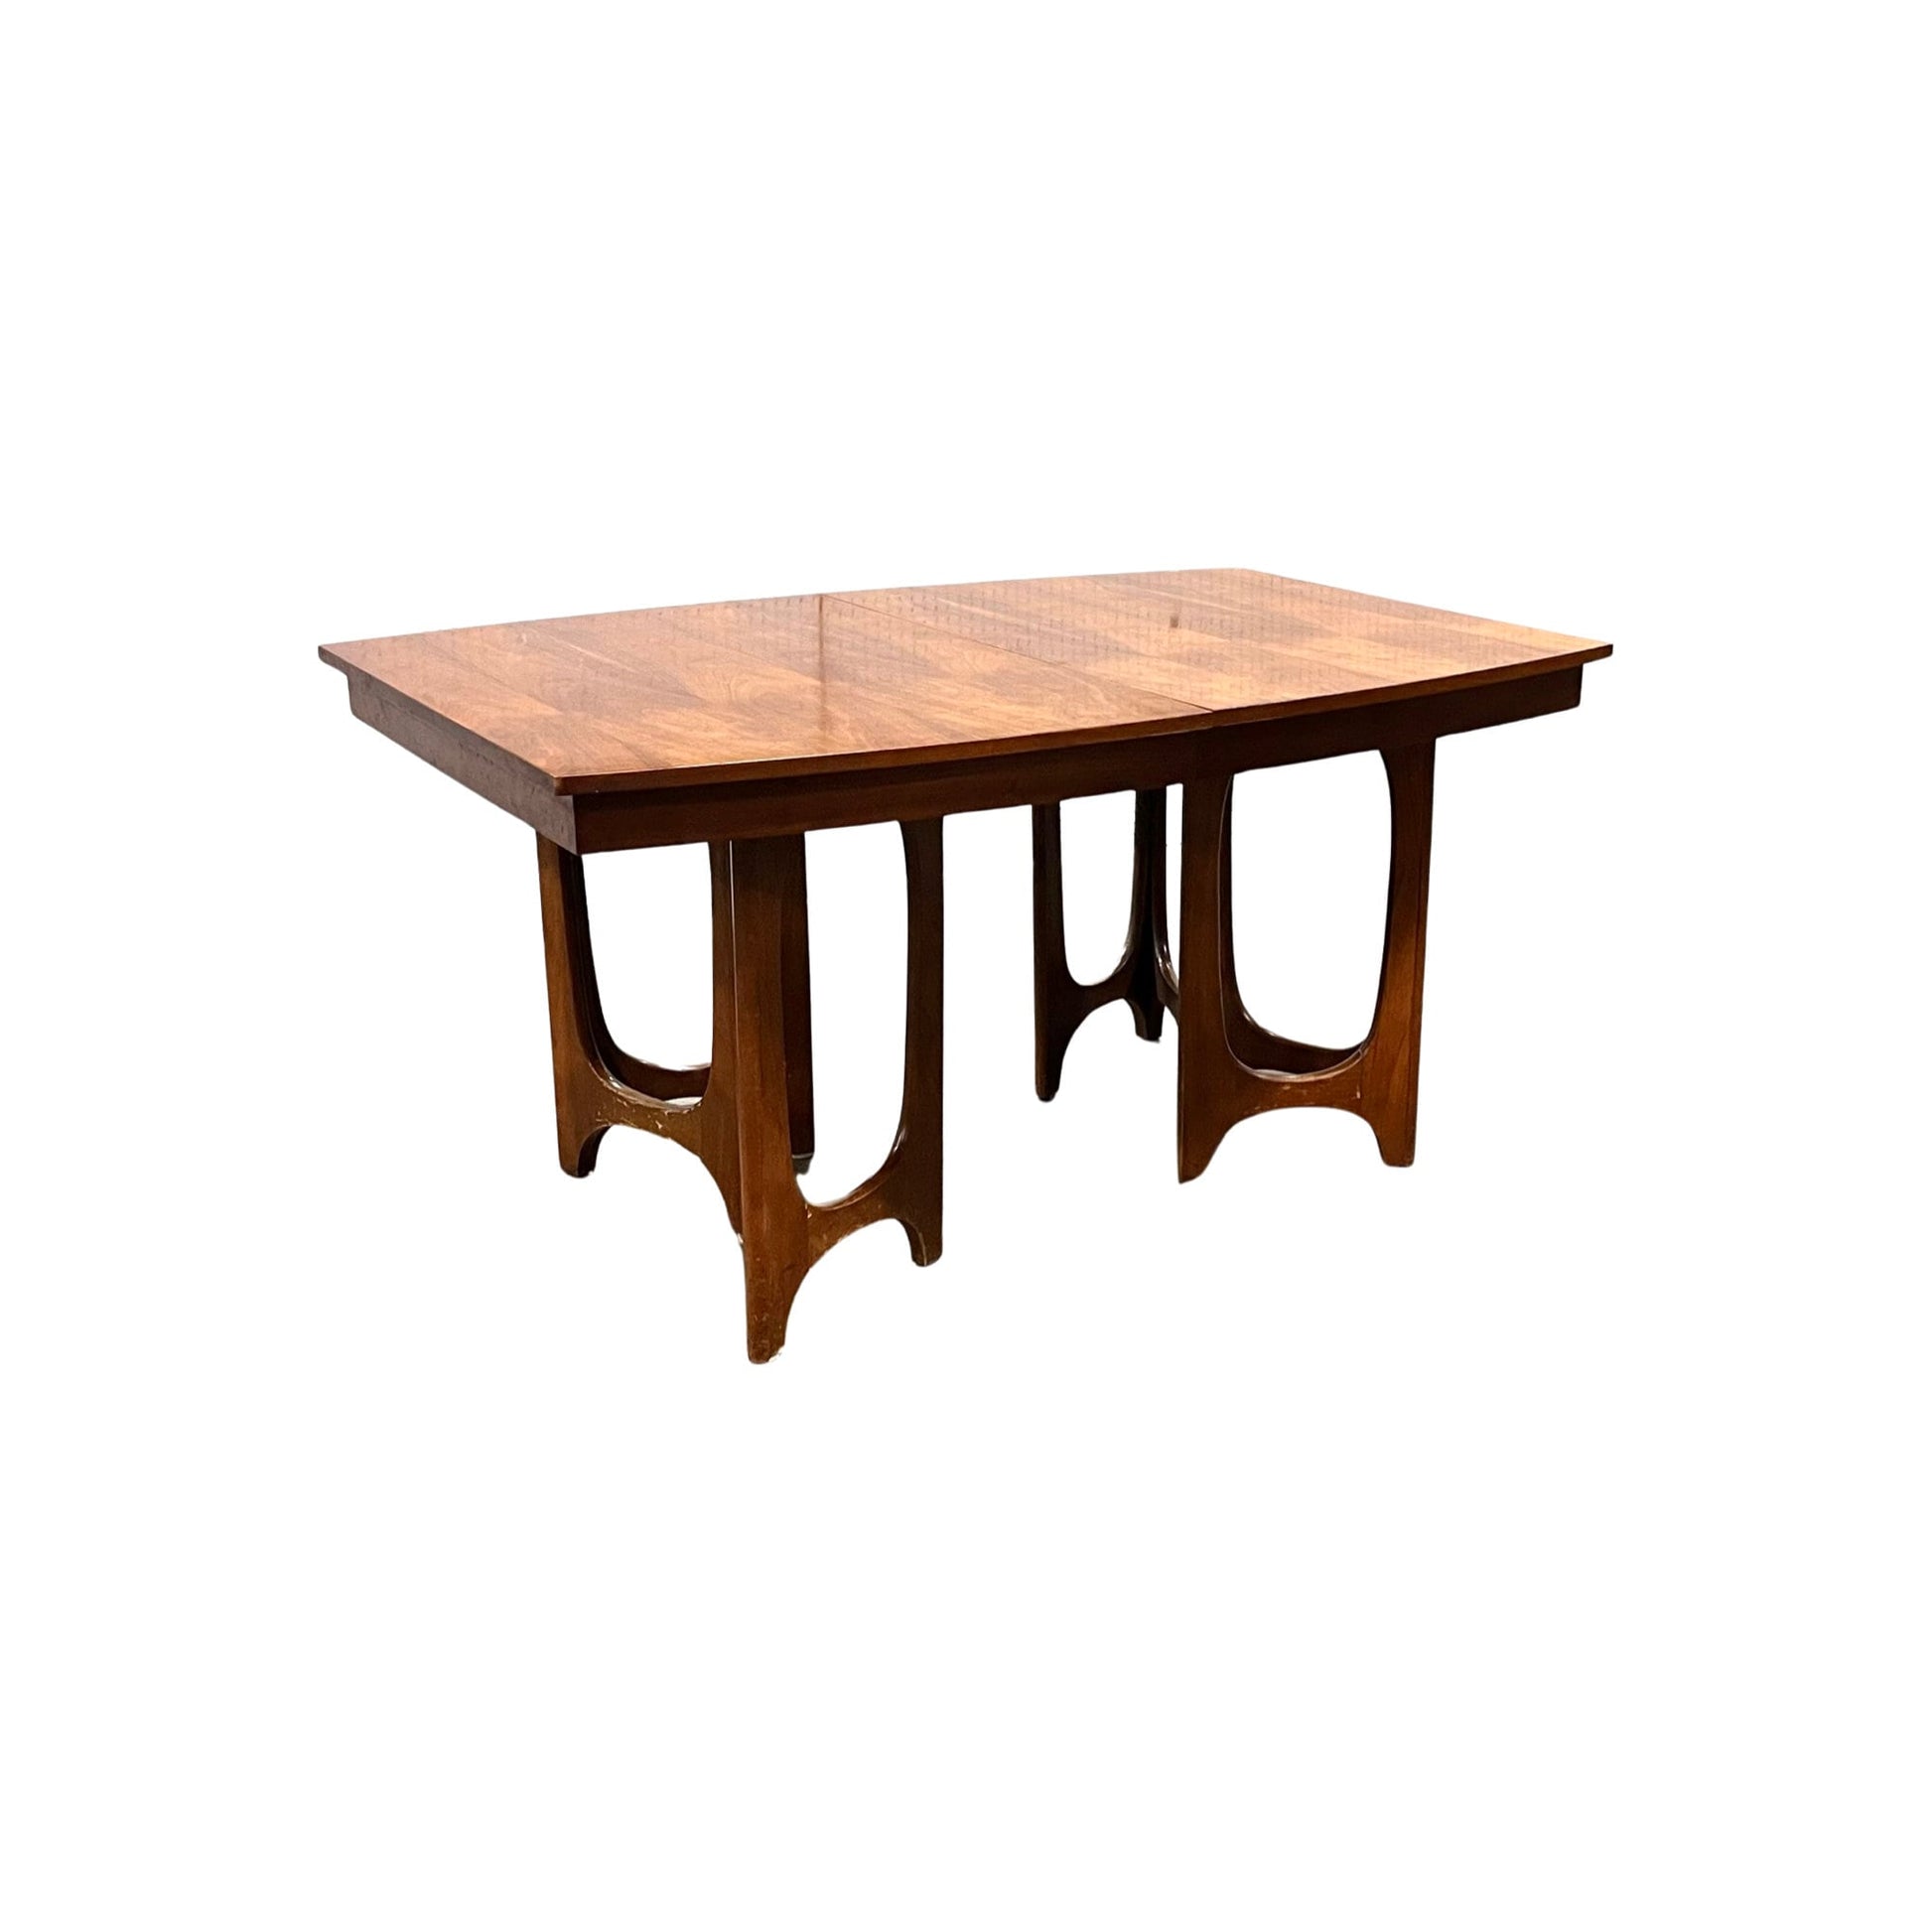 Spectacular Wood Grain with Caramel, Honey, and Chocolate Hues - Young Manufacturing Vintage Pedestal Dining Table from the 1960s